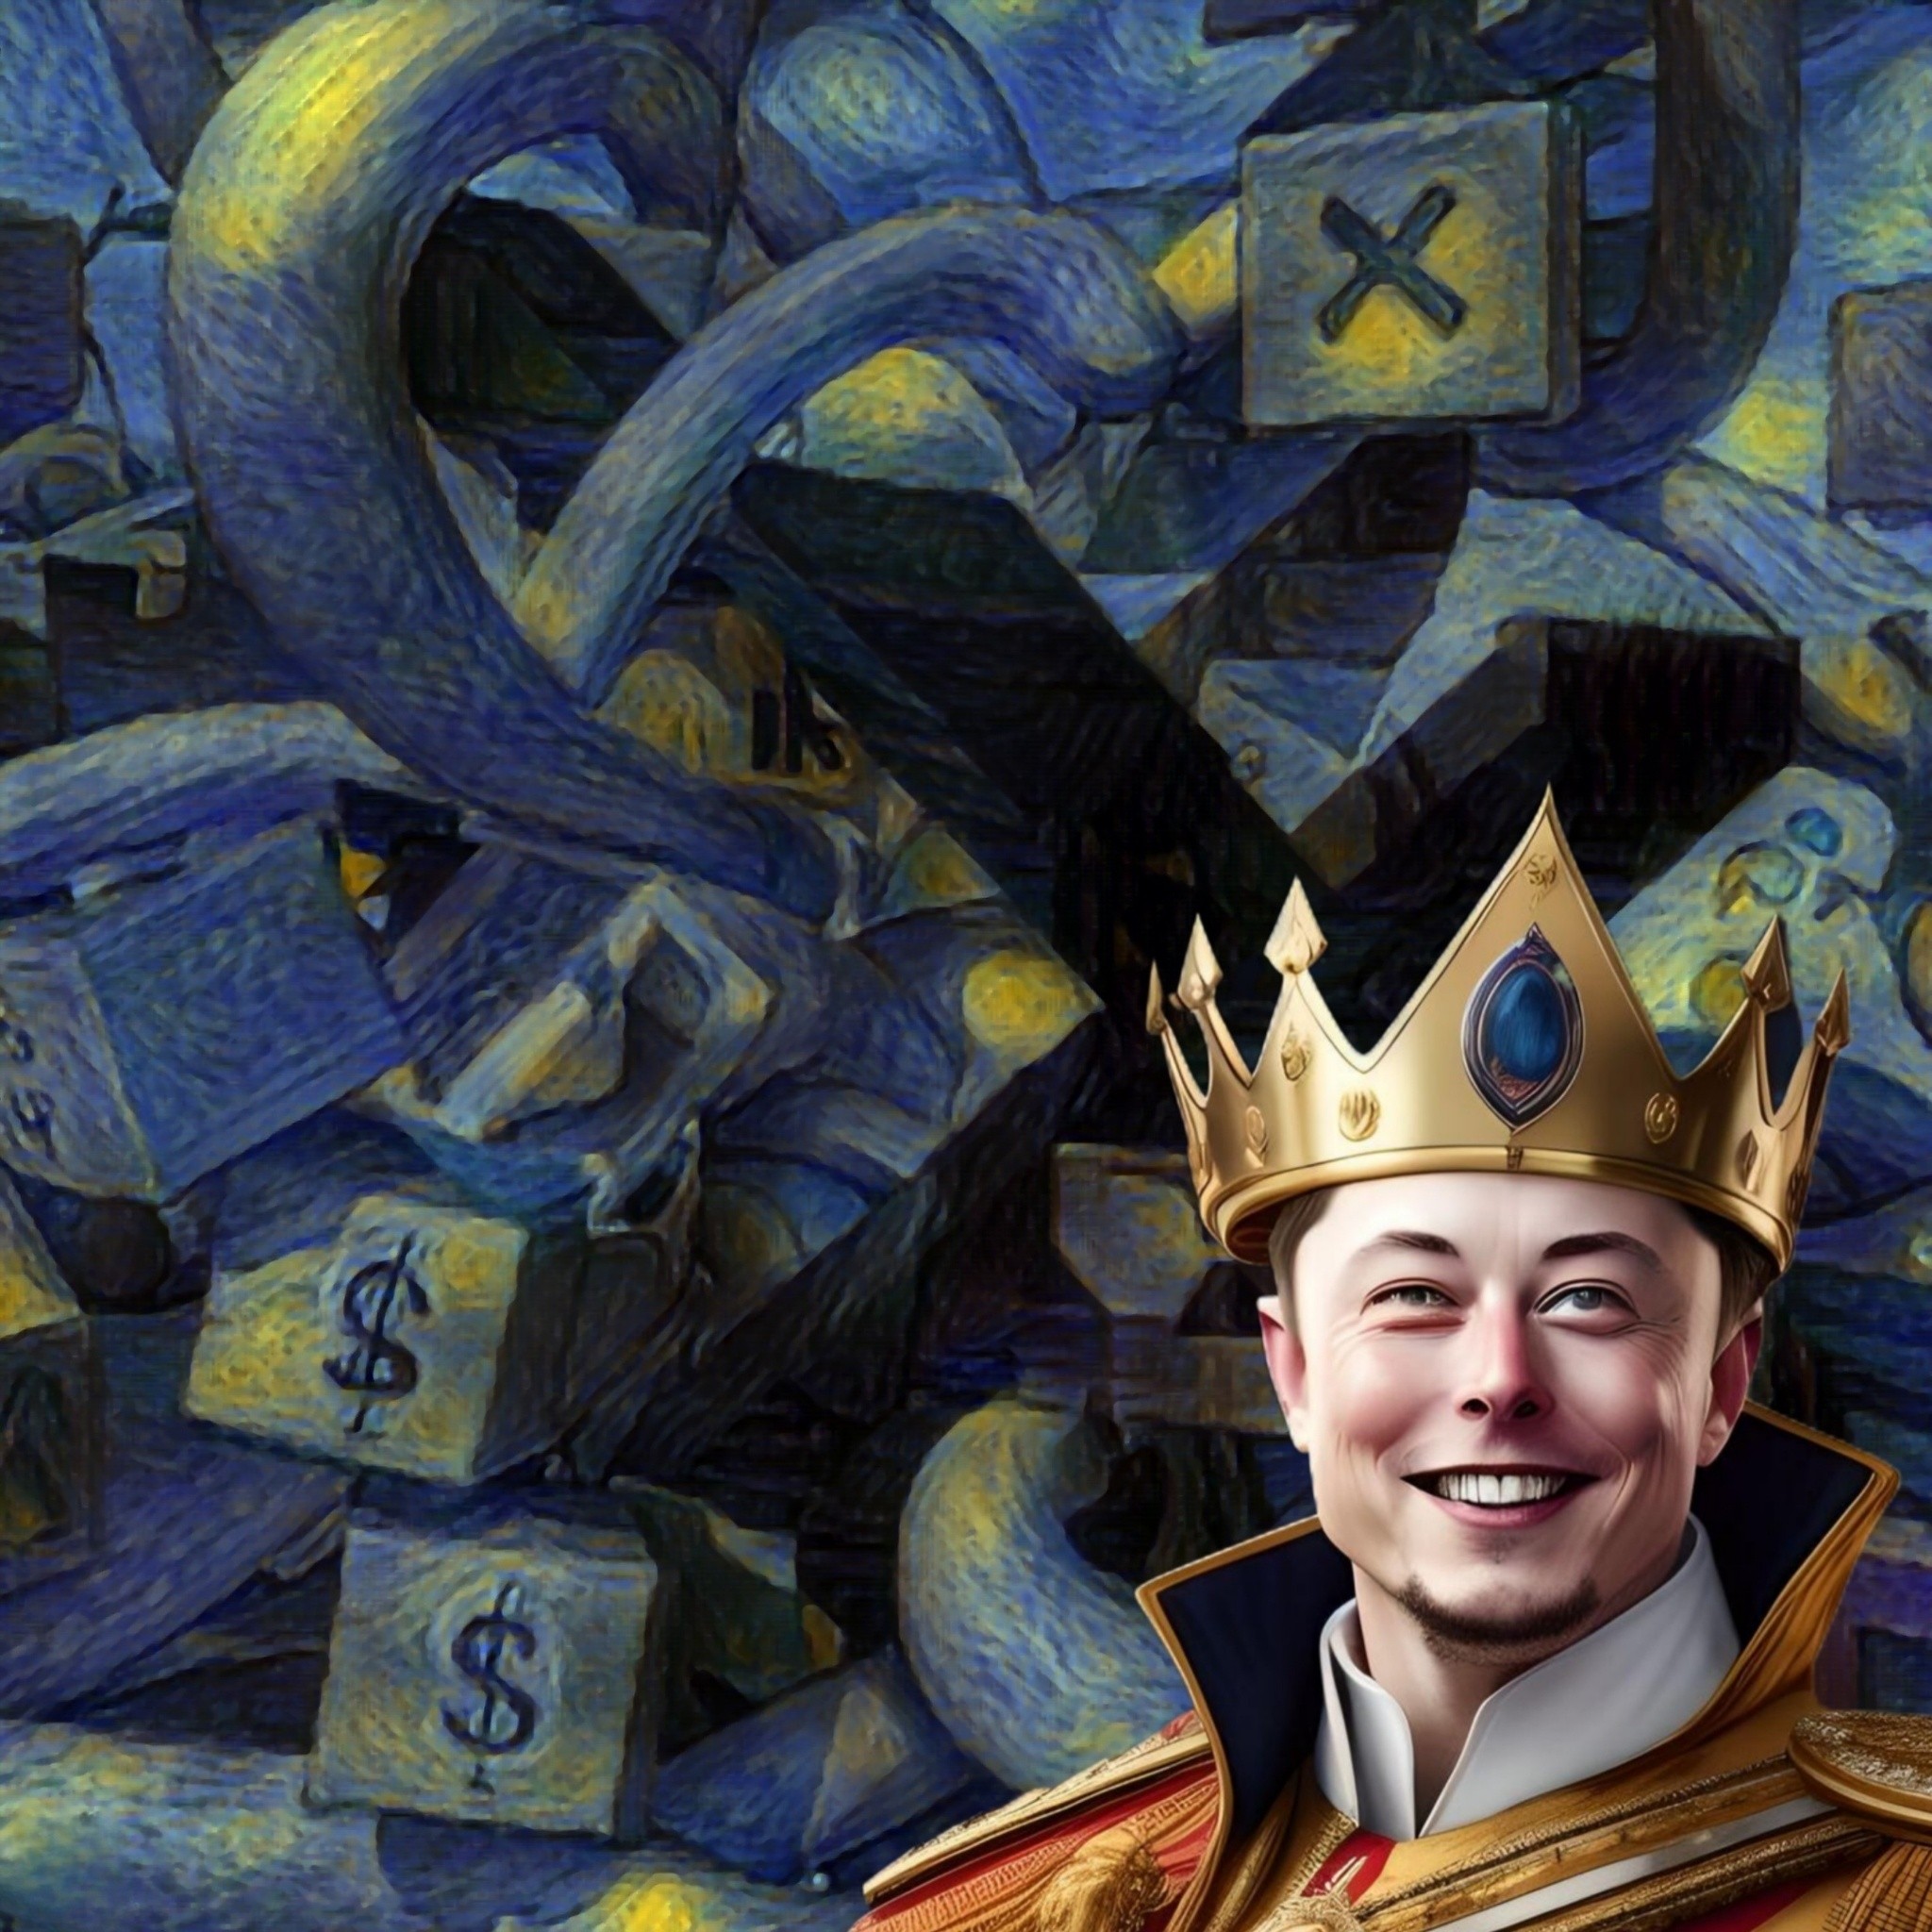 Elon Musk wearing a crown against a Van-Gogh stylized painting of blocks with dollar sign and a large letter 'X'.